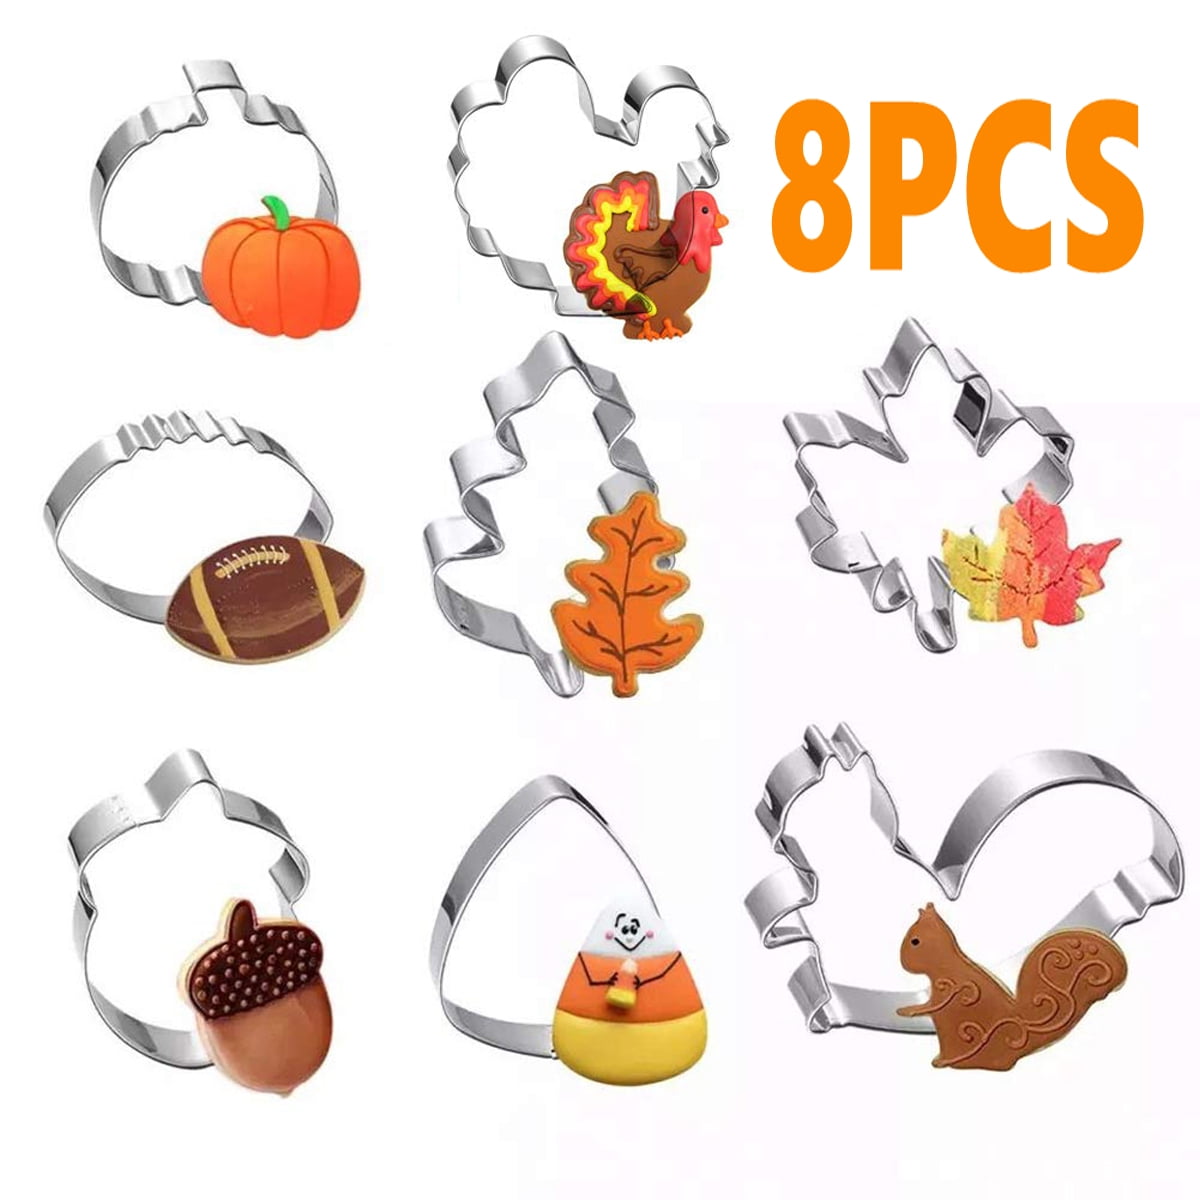 Details about  / 12 pcs LARGE Halloween Thanksgiving Fall Cookie Cutter Set 3 Inches Circle ...